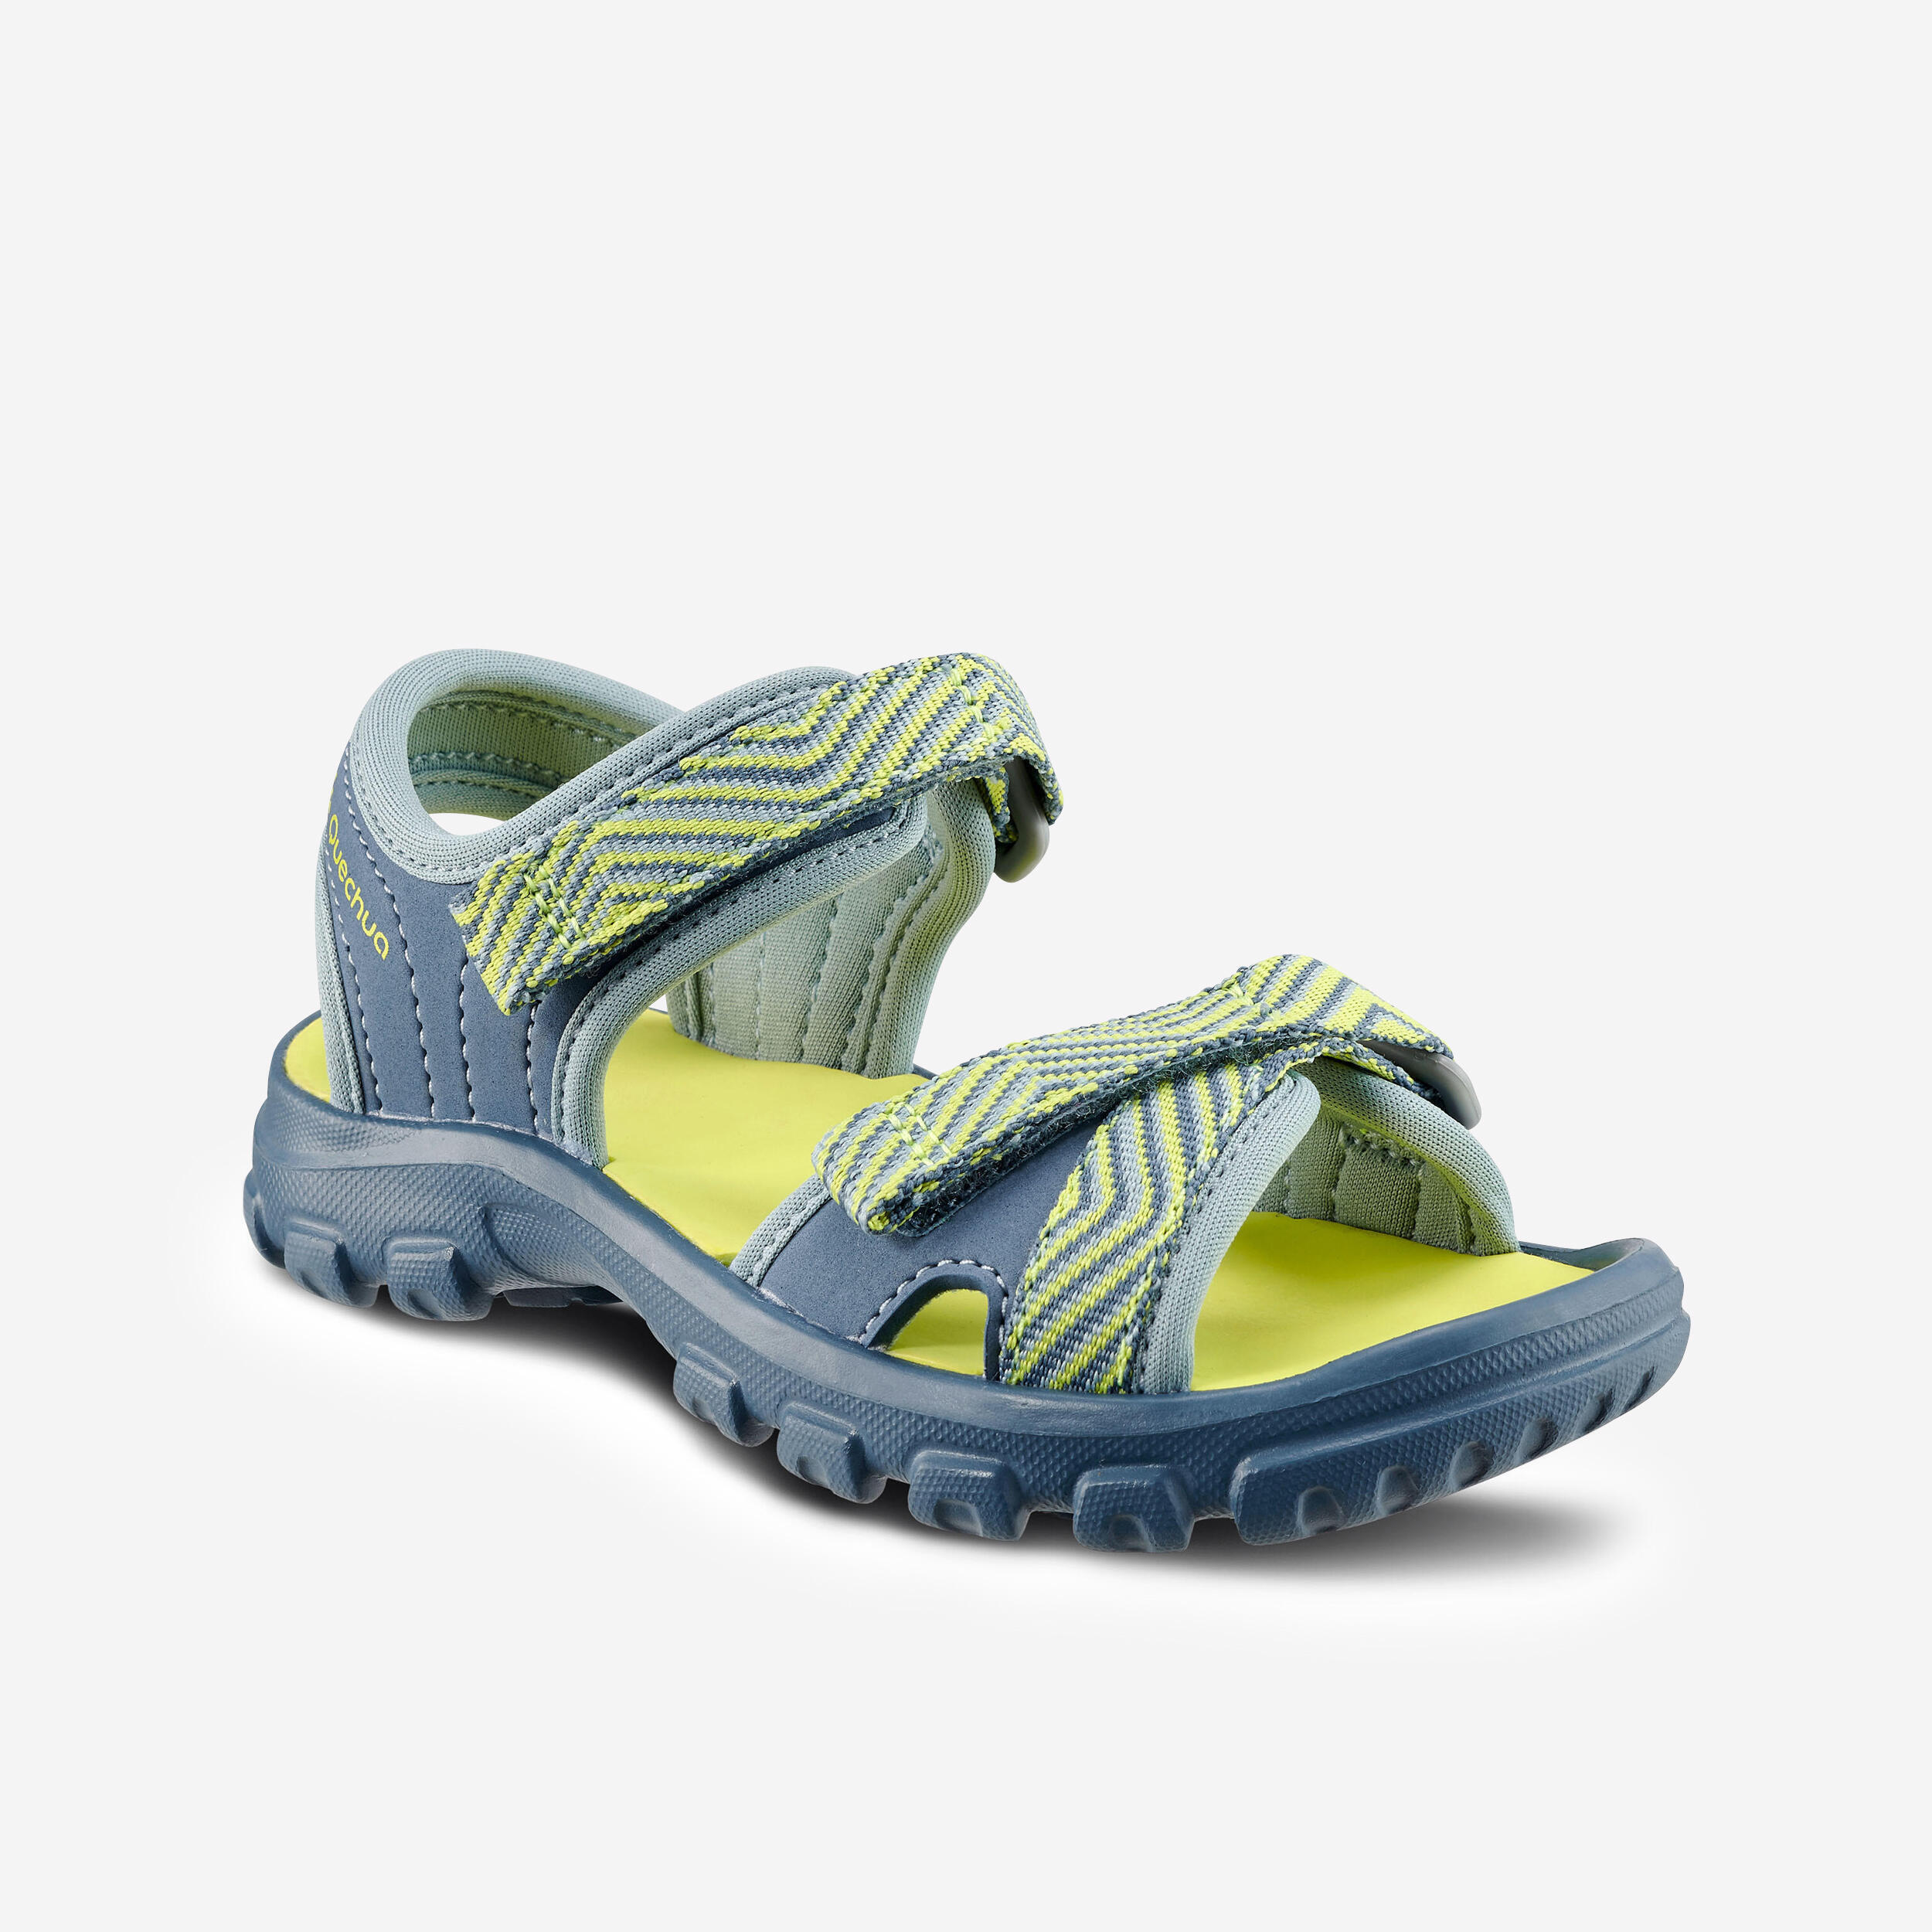 Kids' hiking sandals - Kids' MH100 blue and yellow - size 24 to 31 1/9